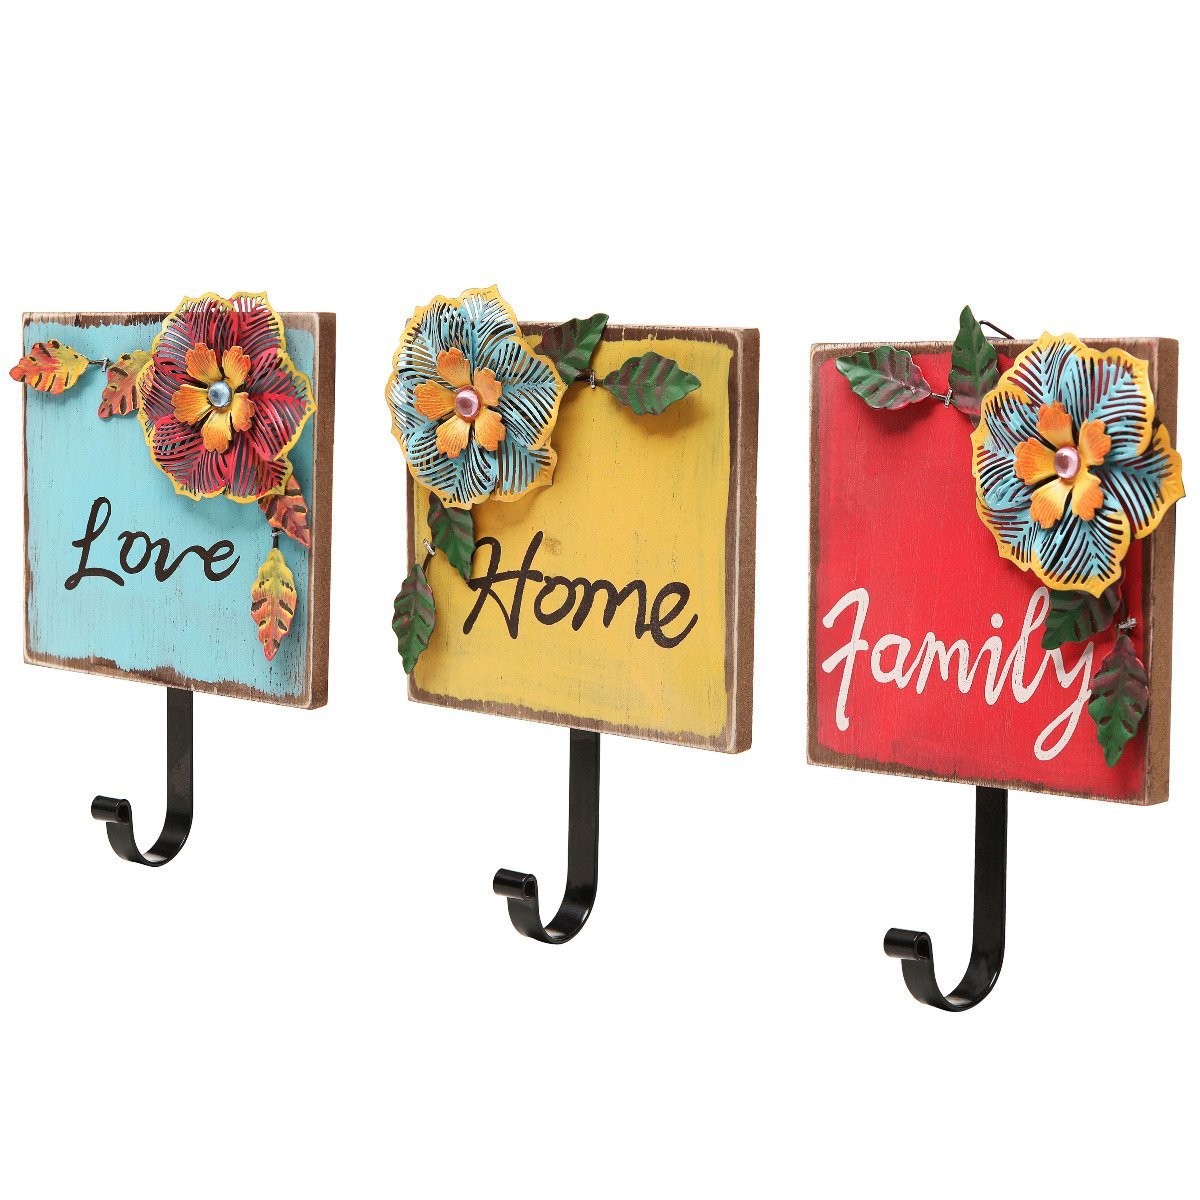 "Family, Home, Love" Wood & Metal Tropical Flowers Wall Coat/Key Hooks (Set of 3: Red/Yellow/Blue)